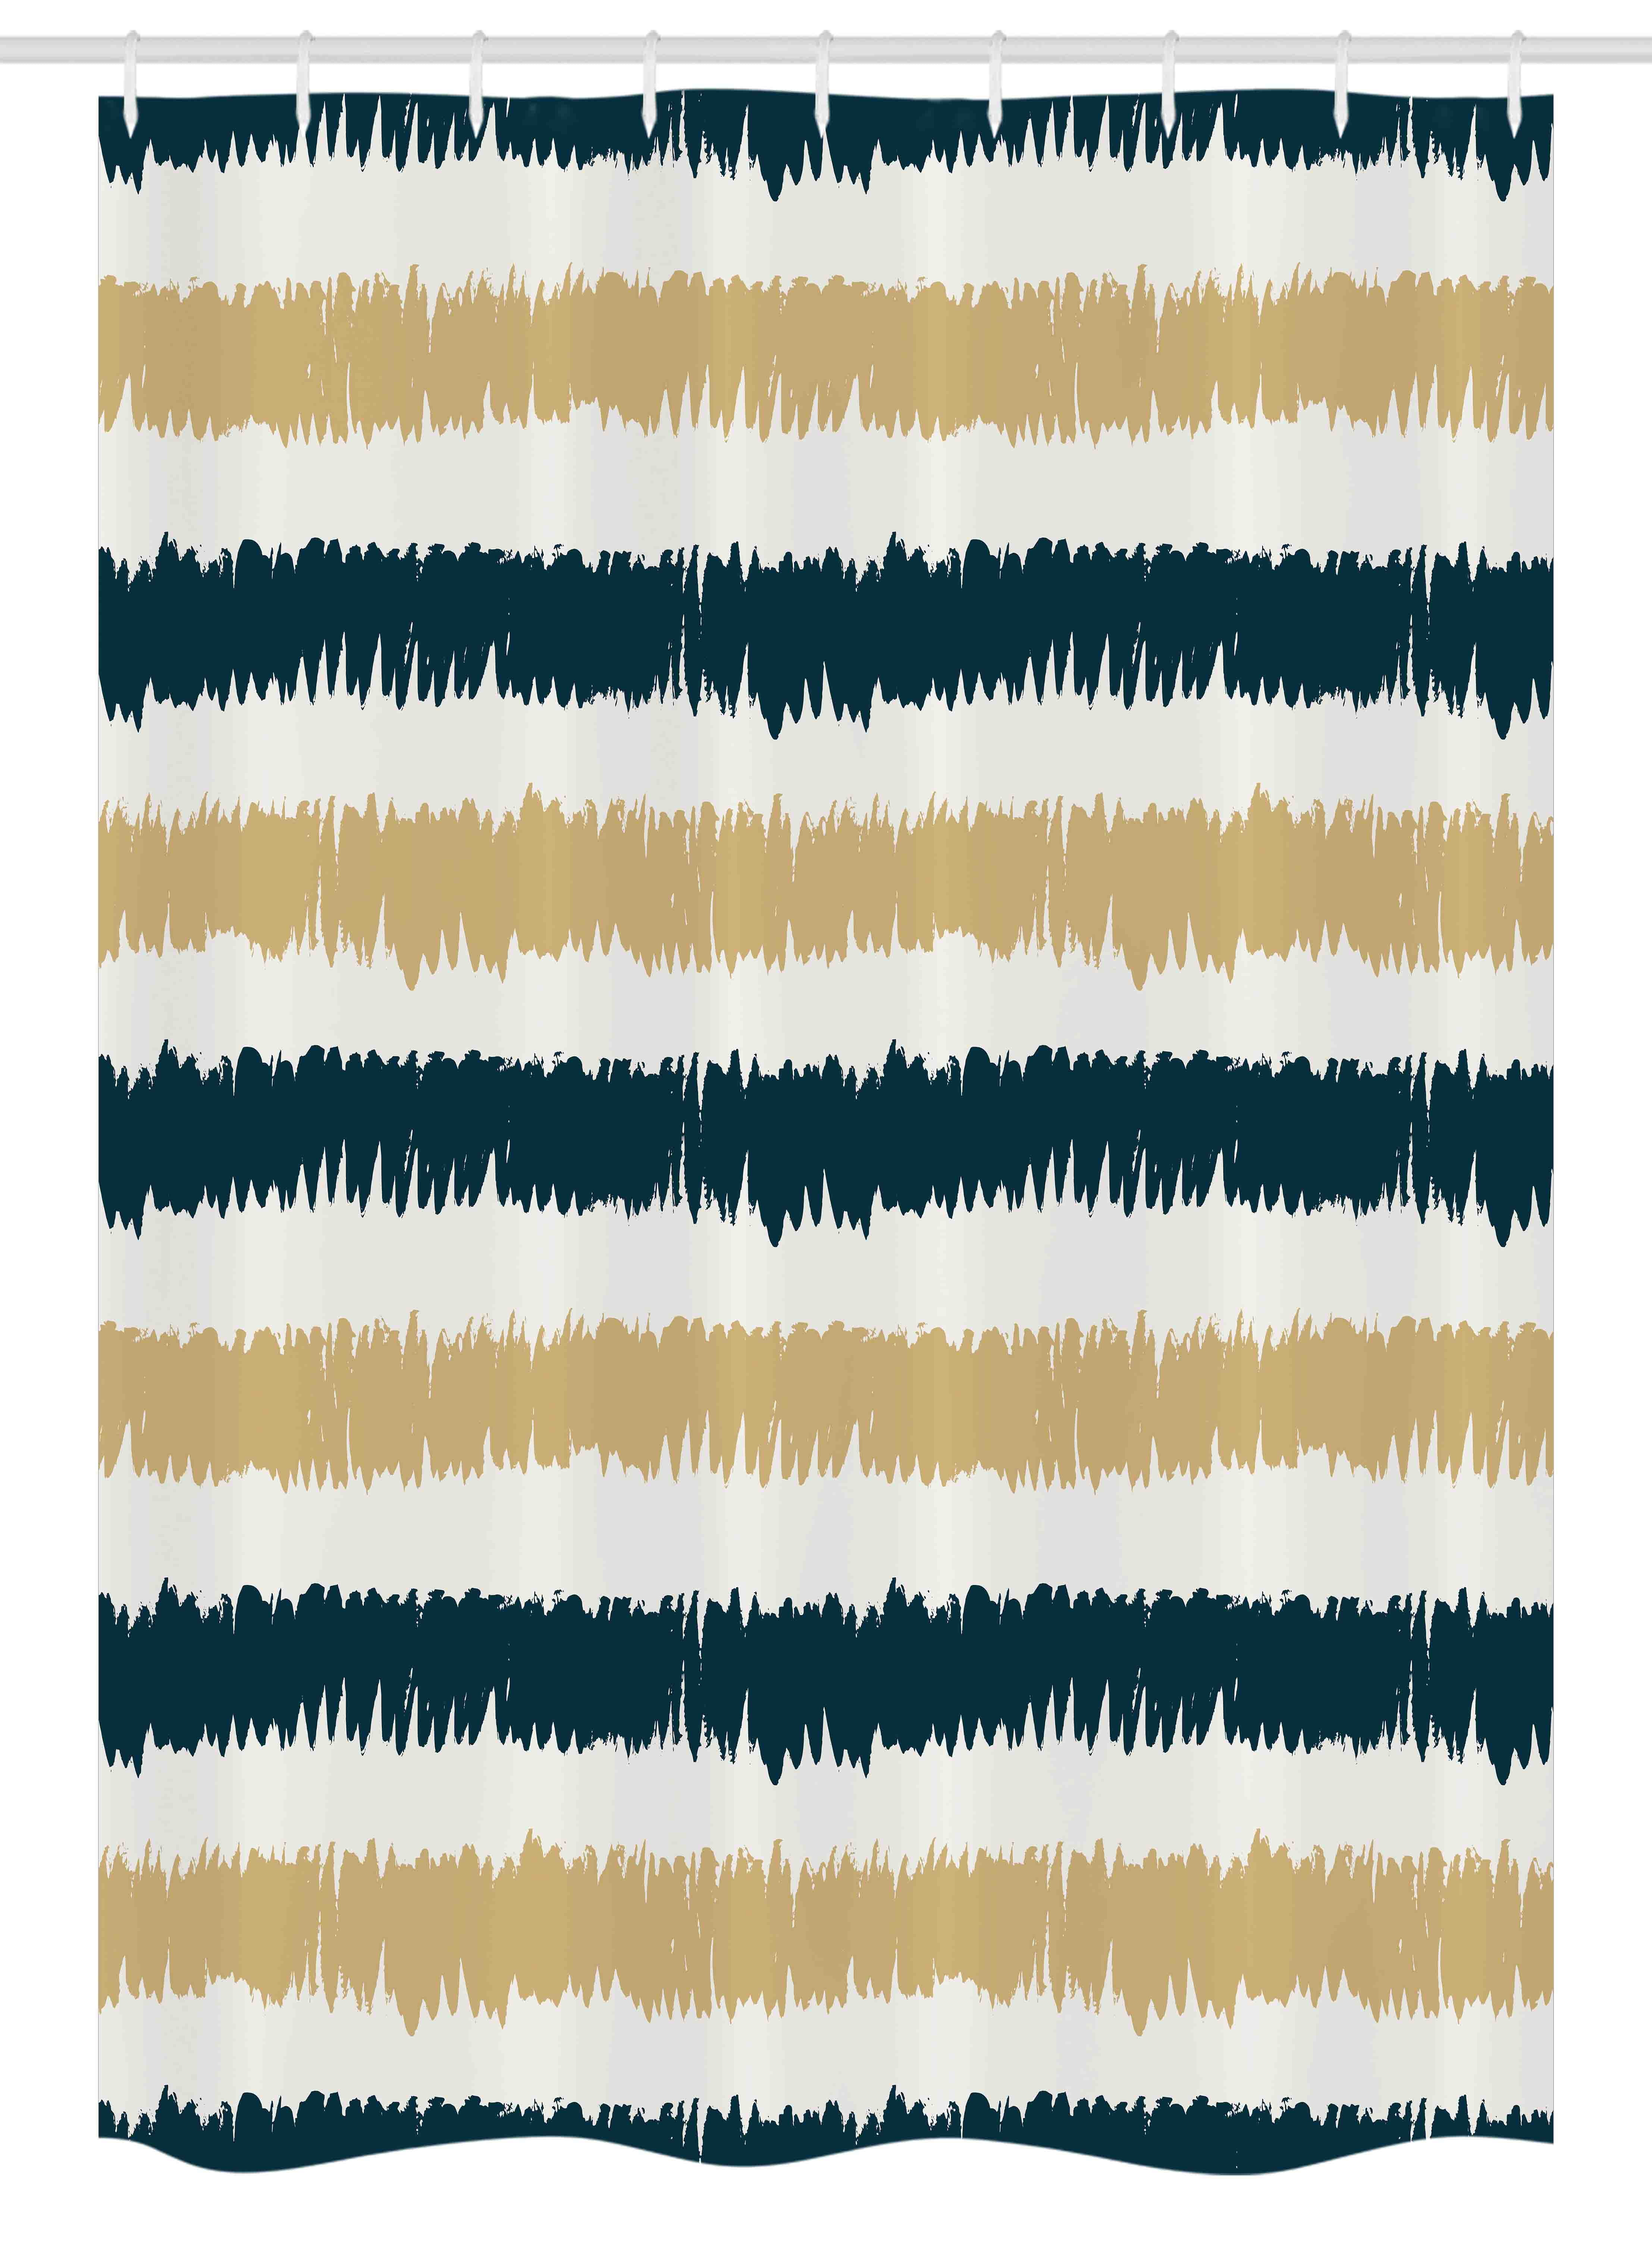 navy blue and tan shower curtain